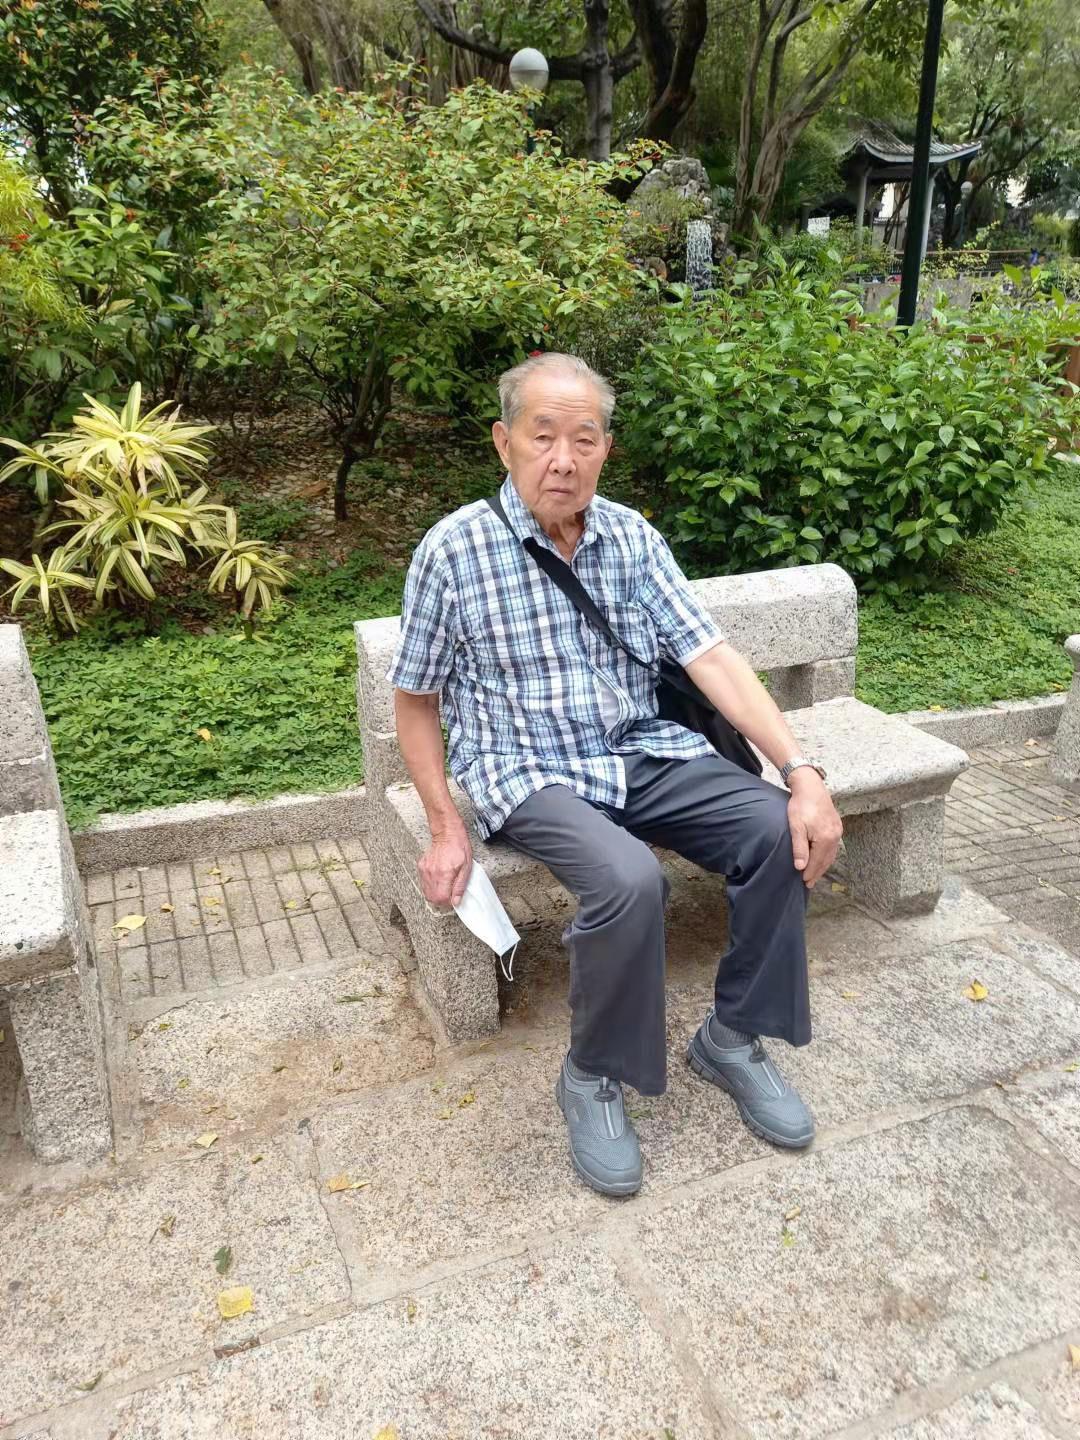 Fan Wai-fu, aged 85, is about 1.6 metres tall, 82 kilograms in weight and of fat build. He has a round face with yellow complexion and short white hair. He was last seen wearing a brown jacket, grey trousers and grey sports shoes.